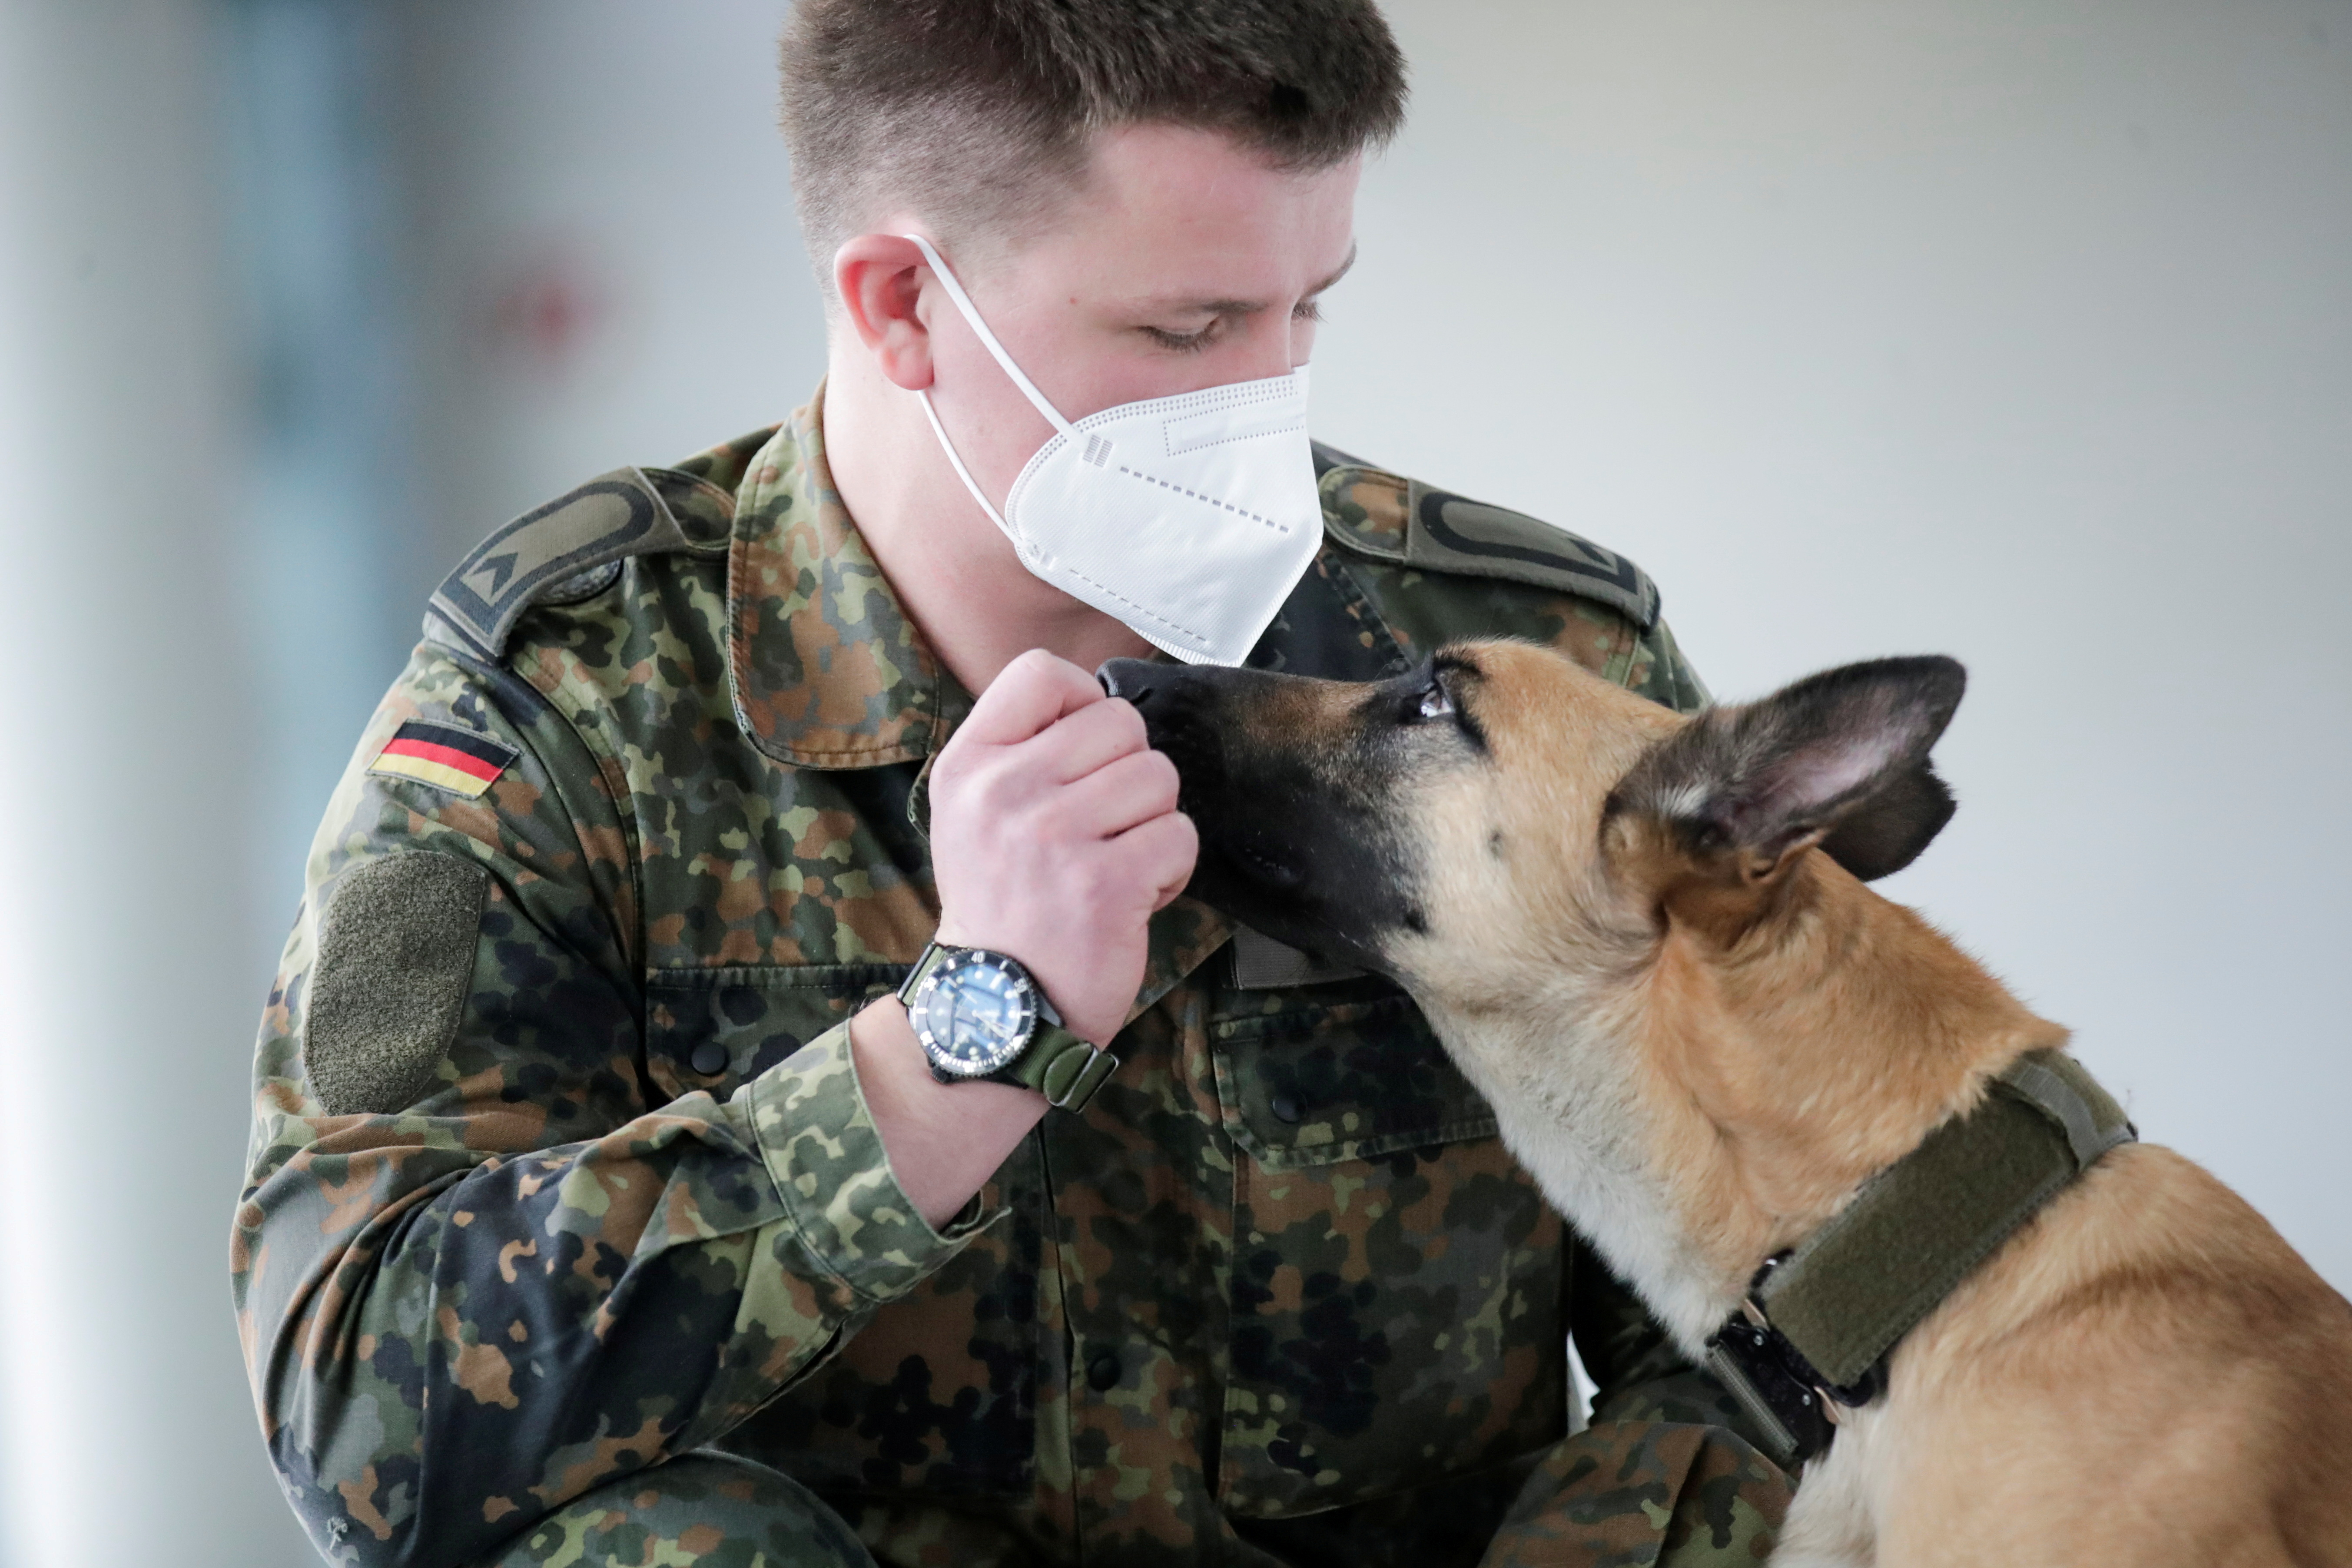 A member of a military poses with Filou, the 3-year-old Belgian shepherd which is able to detect COVID-19 in humans' saliva samples, in Hanover, Germany, February 3, 2021. REUTERS/Hannibal Hanschke